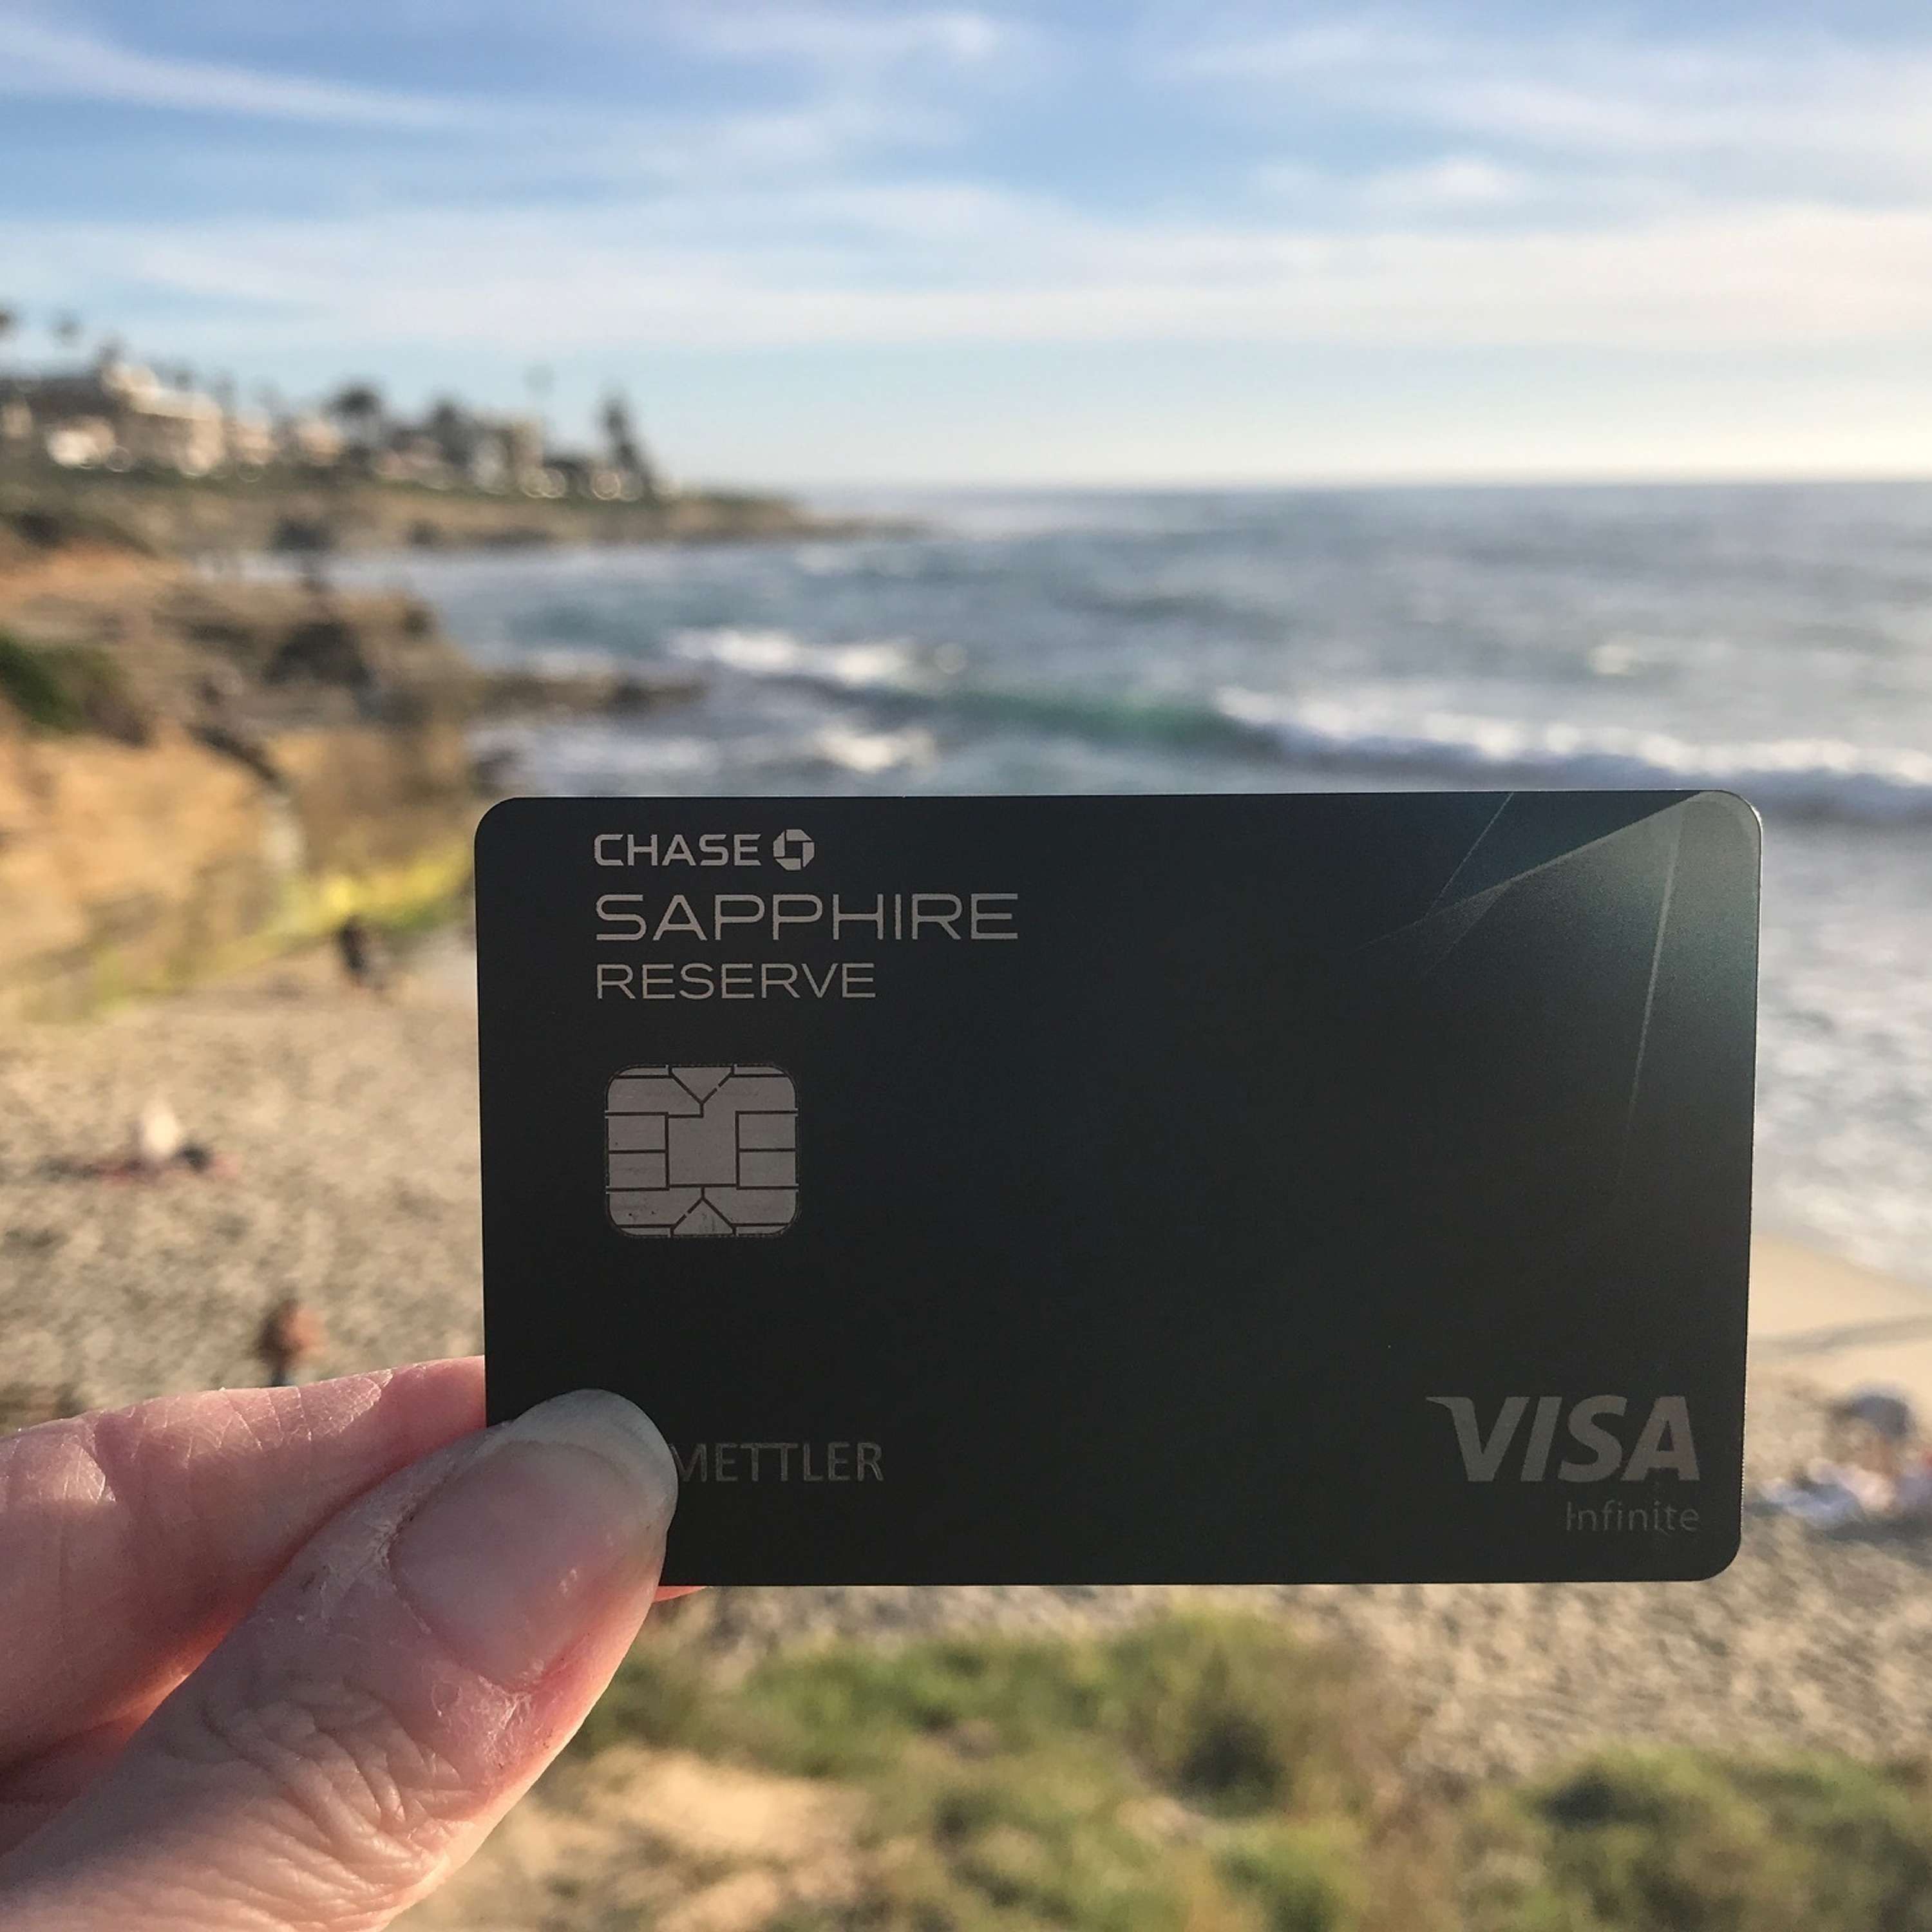 149 | Why I Don't Recommend Getting Chase Sapphire Reserve